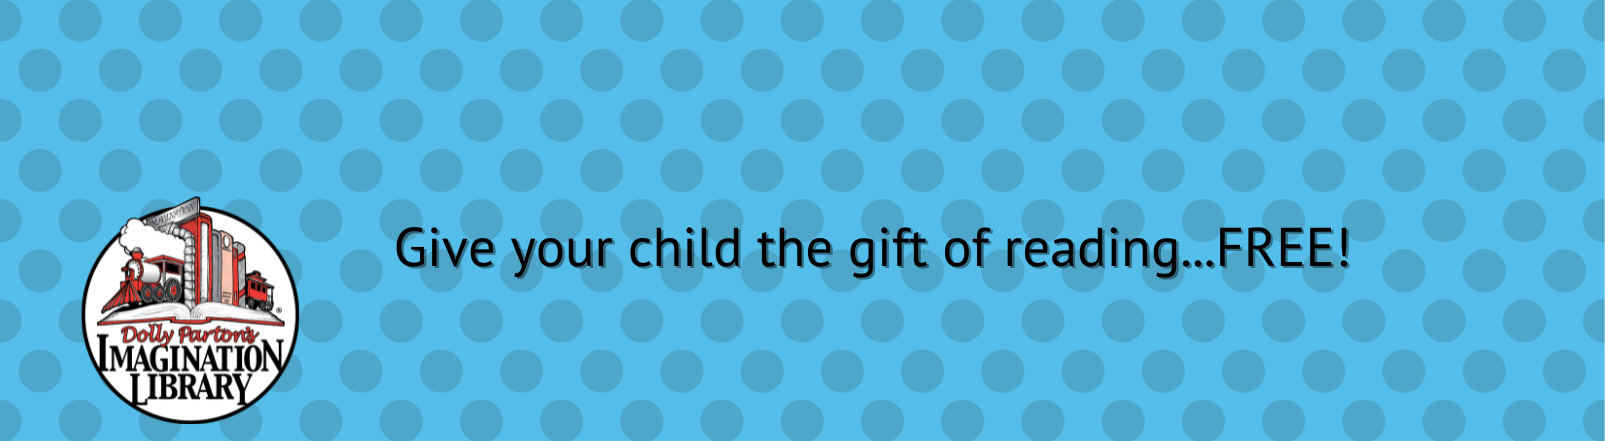 Text: Give your child the gift of reading...free!